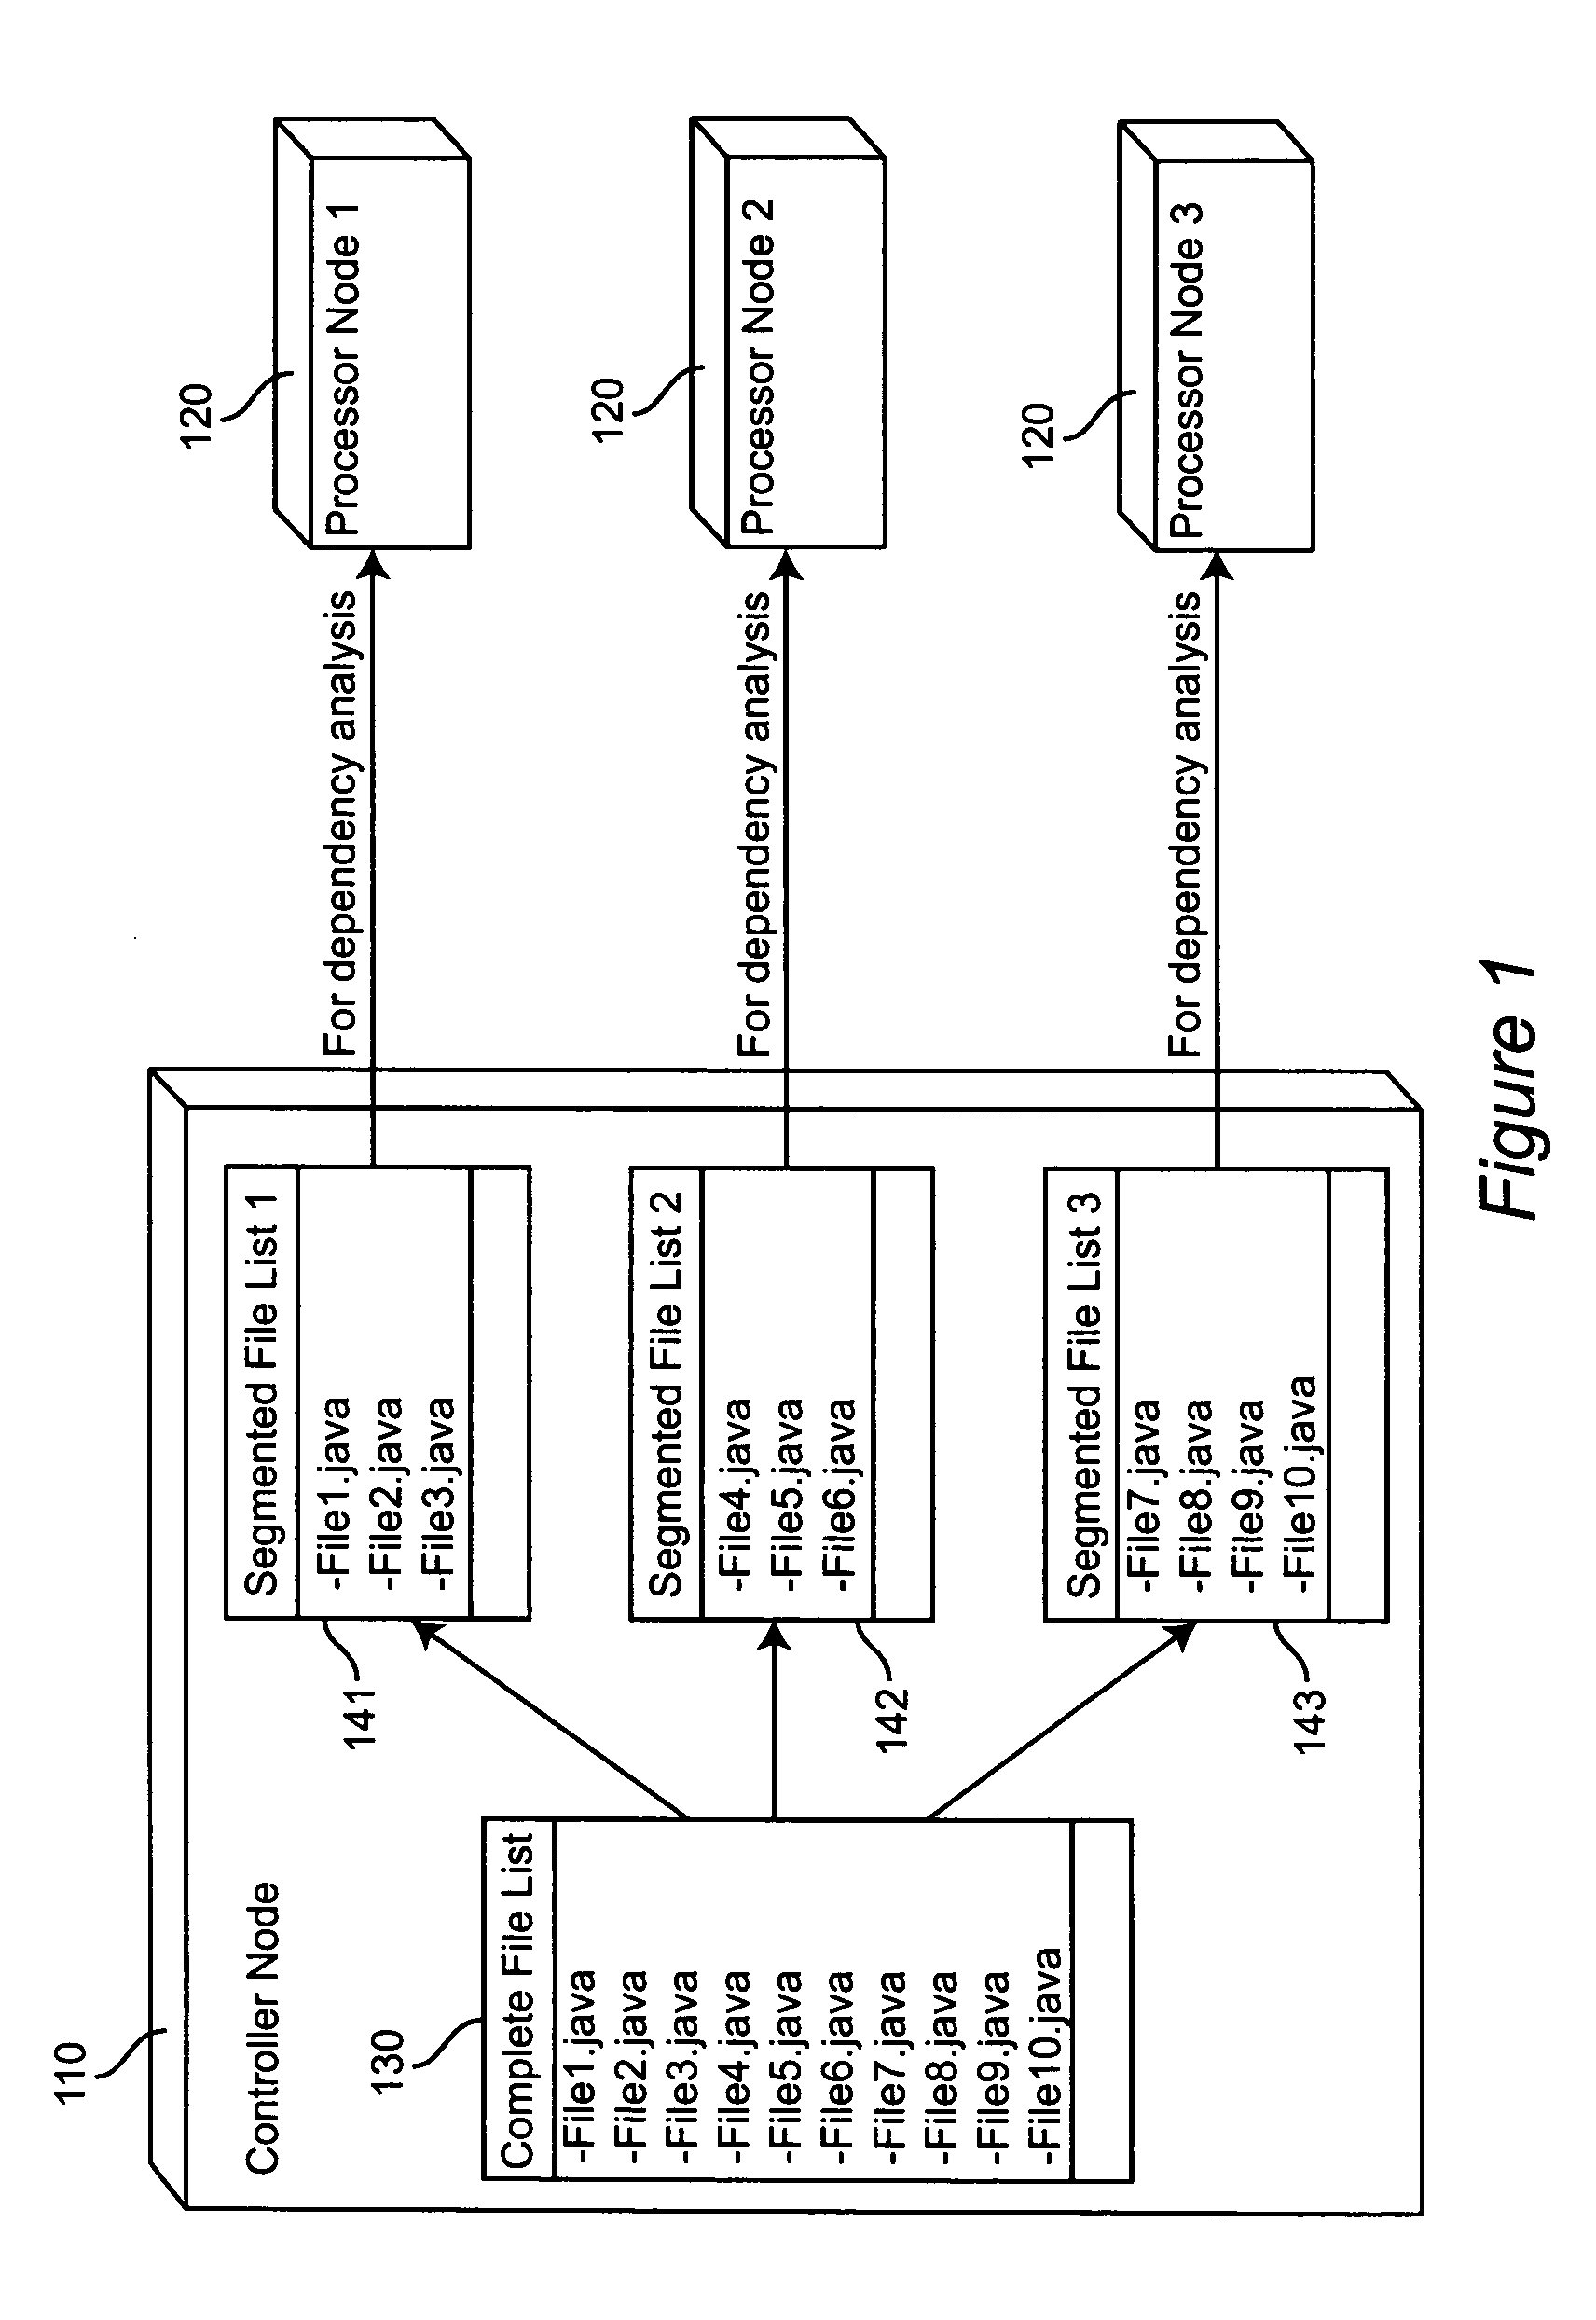 System and method for grid-based distribution of Java project compilation